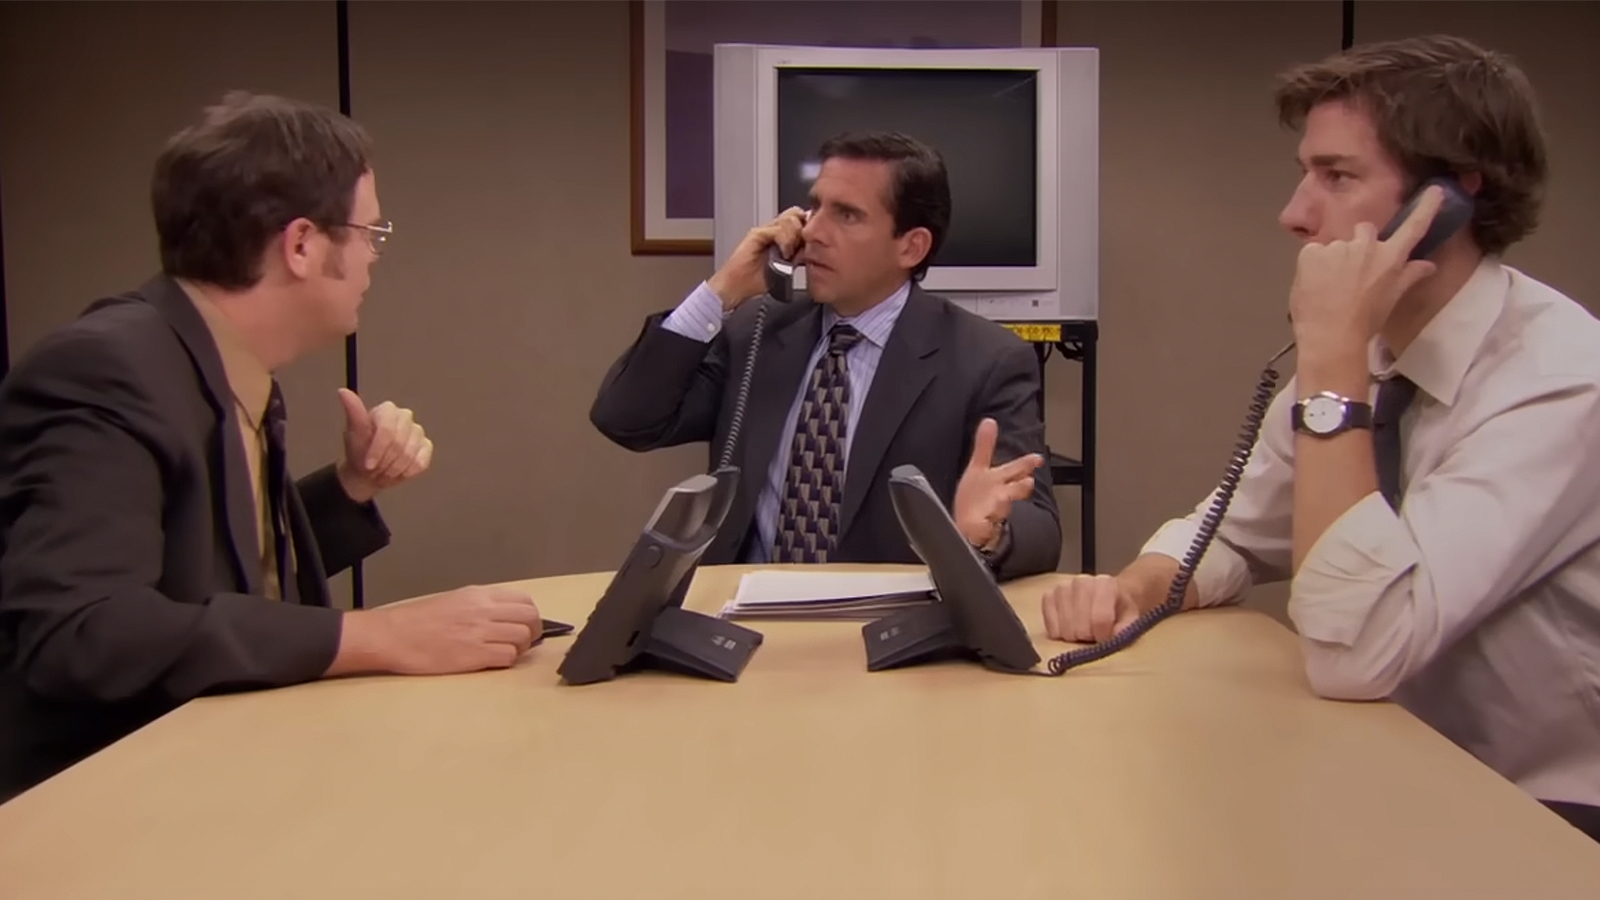 A scene of Dwight, Jim and Michael from The Office (US) TV show